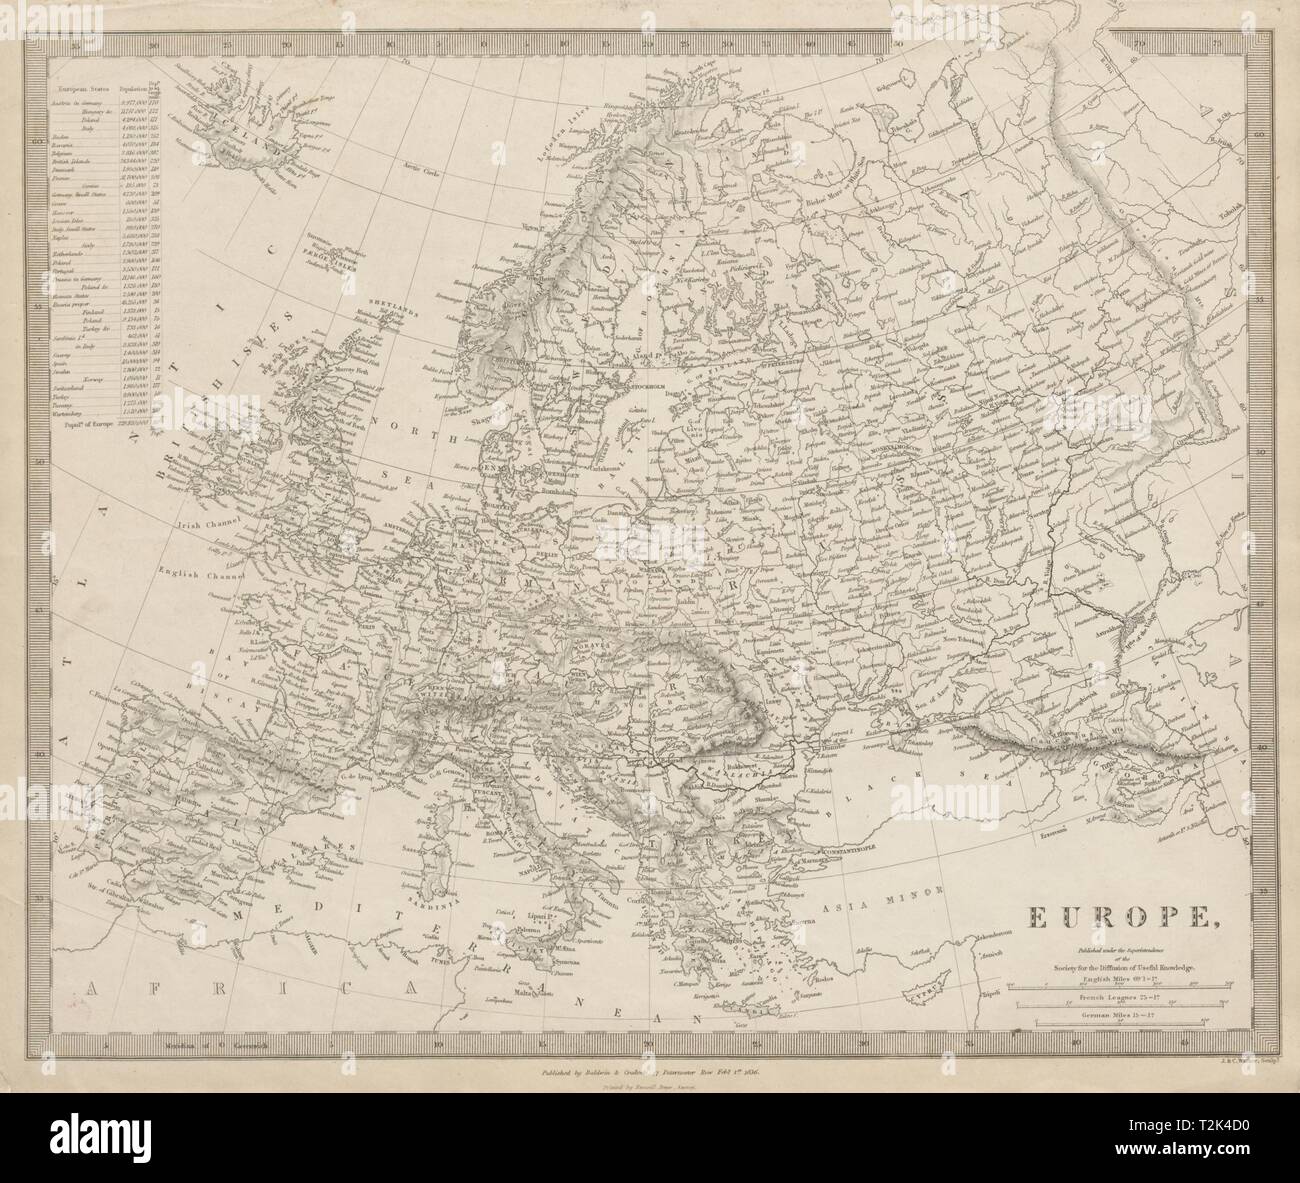 EUROPE. General map. Inset table of population & density by country. SDUK 1844 Stock Photo